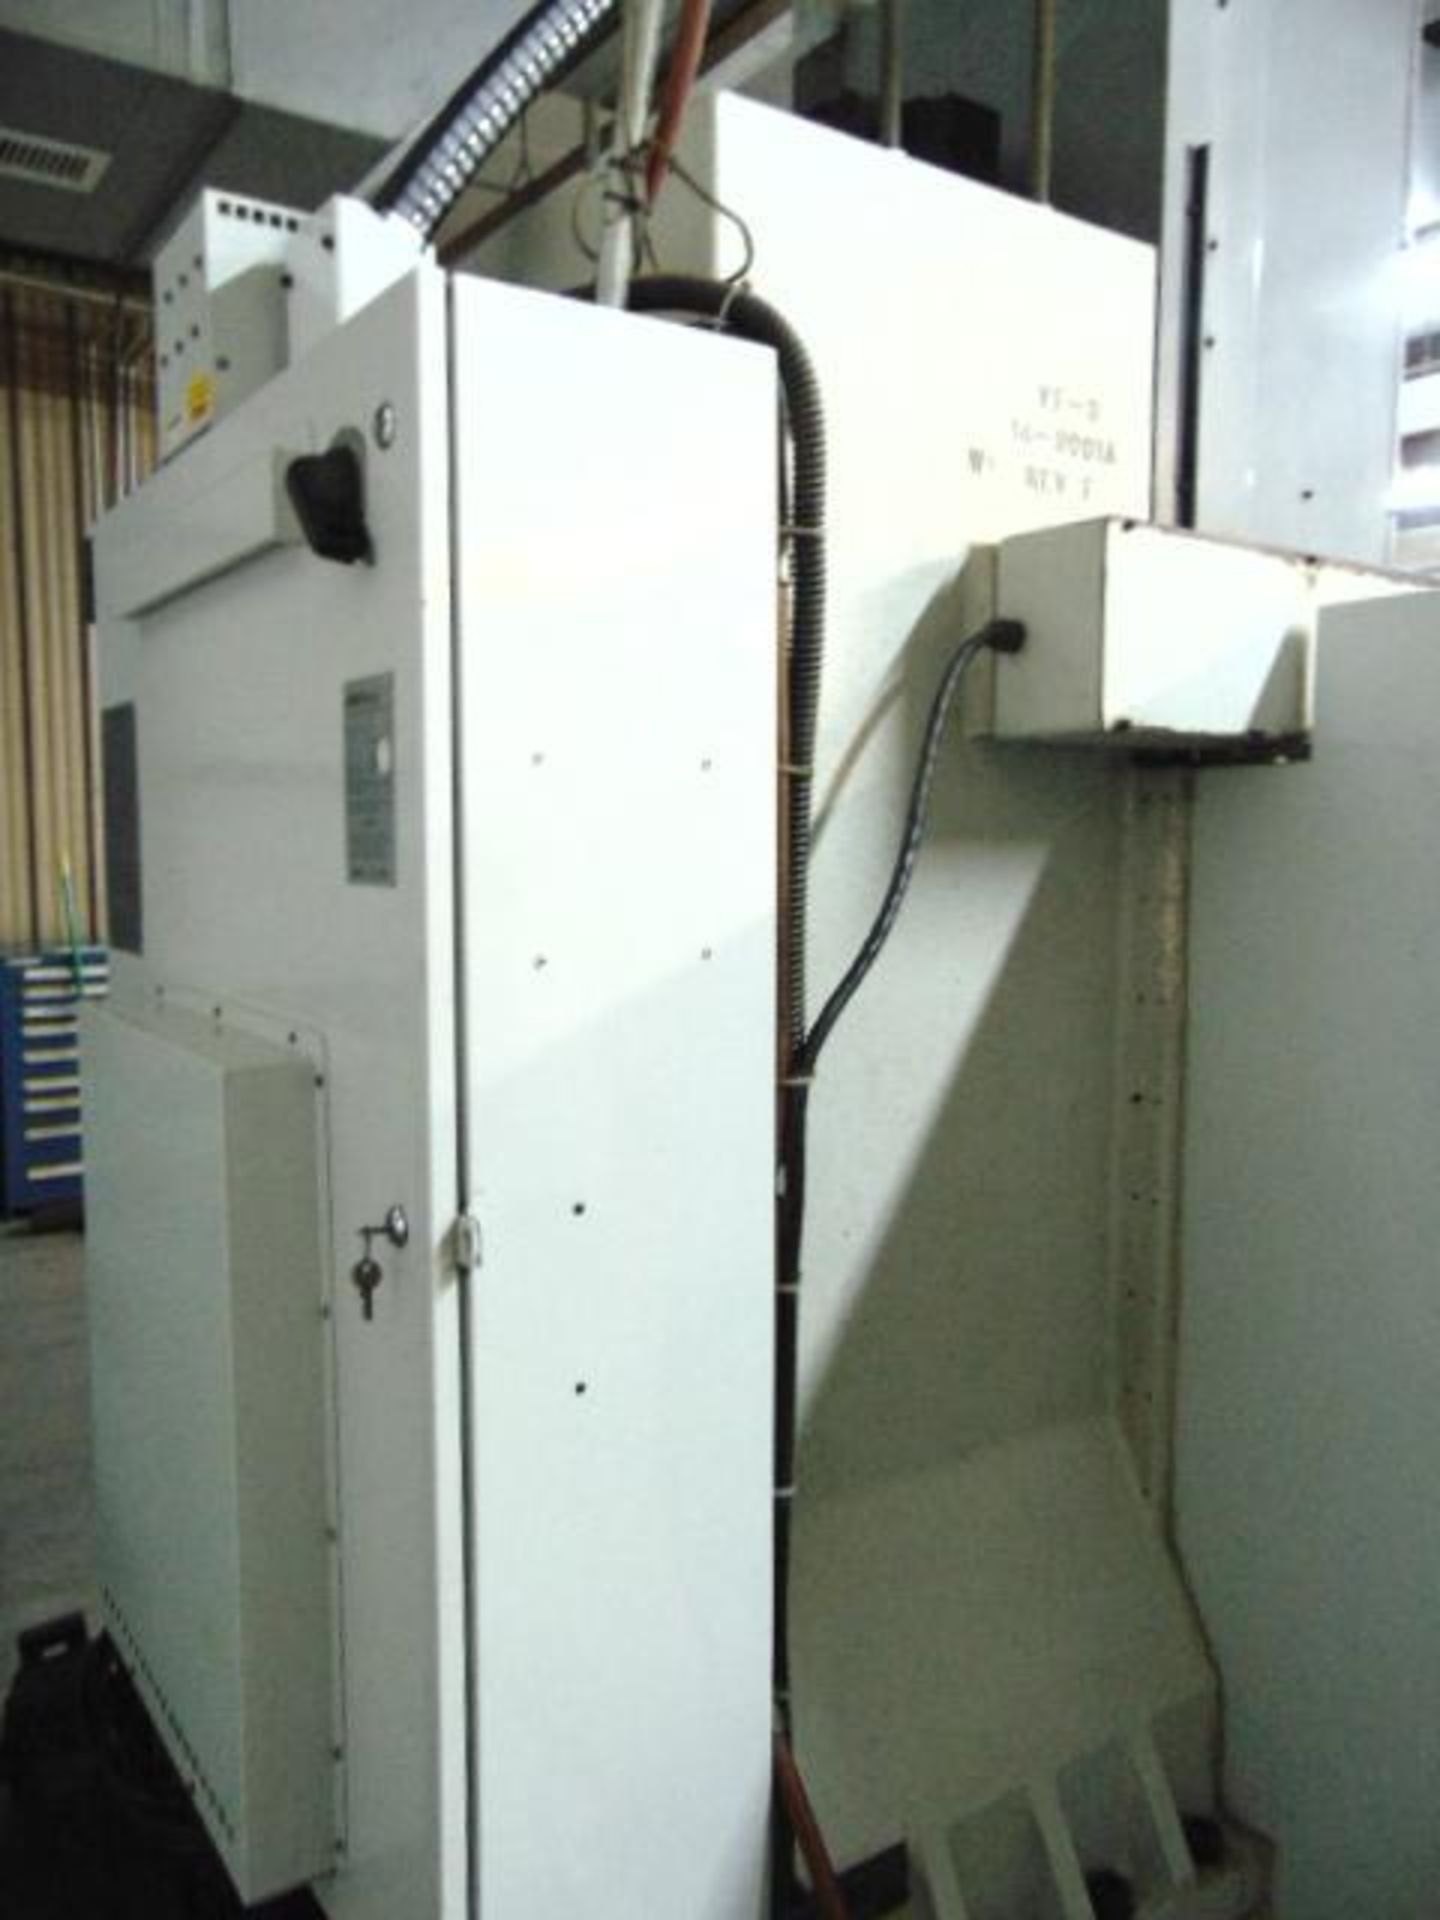 4-AXIS VERTICAL MACHINING CENTER, HAAS MDL. VF-3, new 1997, 48" x 18" tbl. size, 40" X, 20" Y, 25" Z - Image 10 of 13